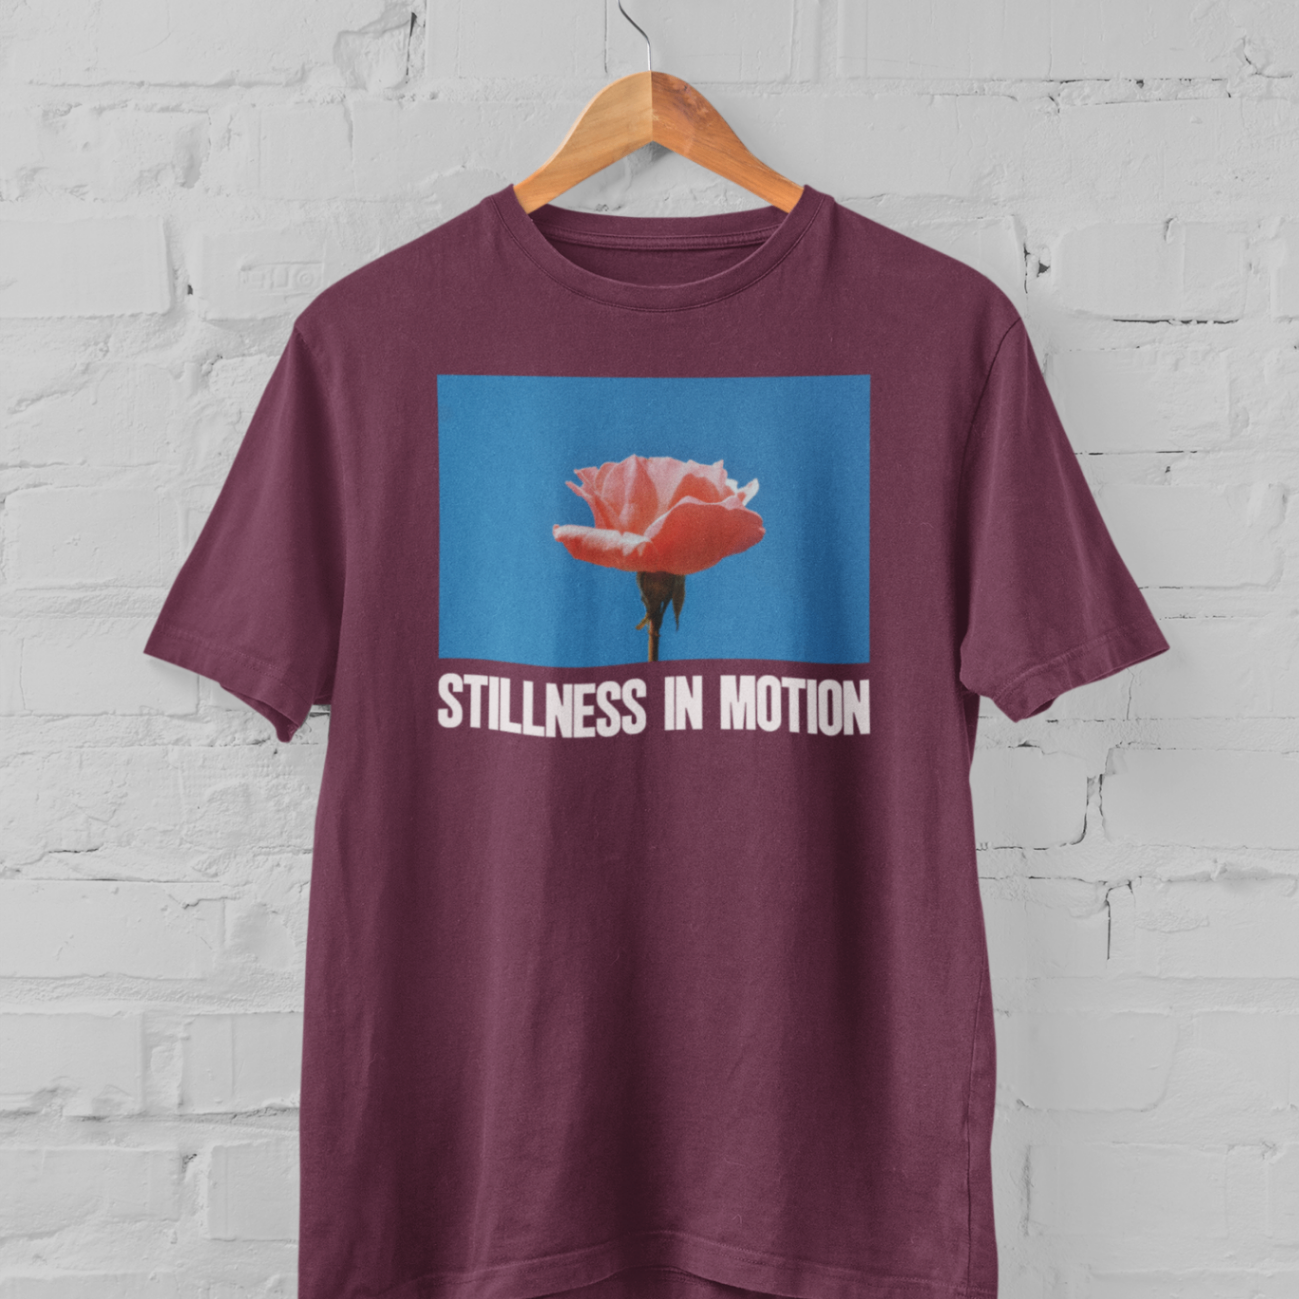 a maroon tshirt with stillness in motion written in text under a pink flower over a sky blue backround